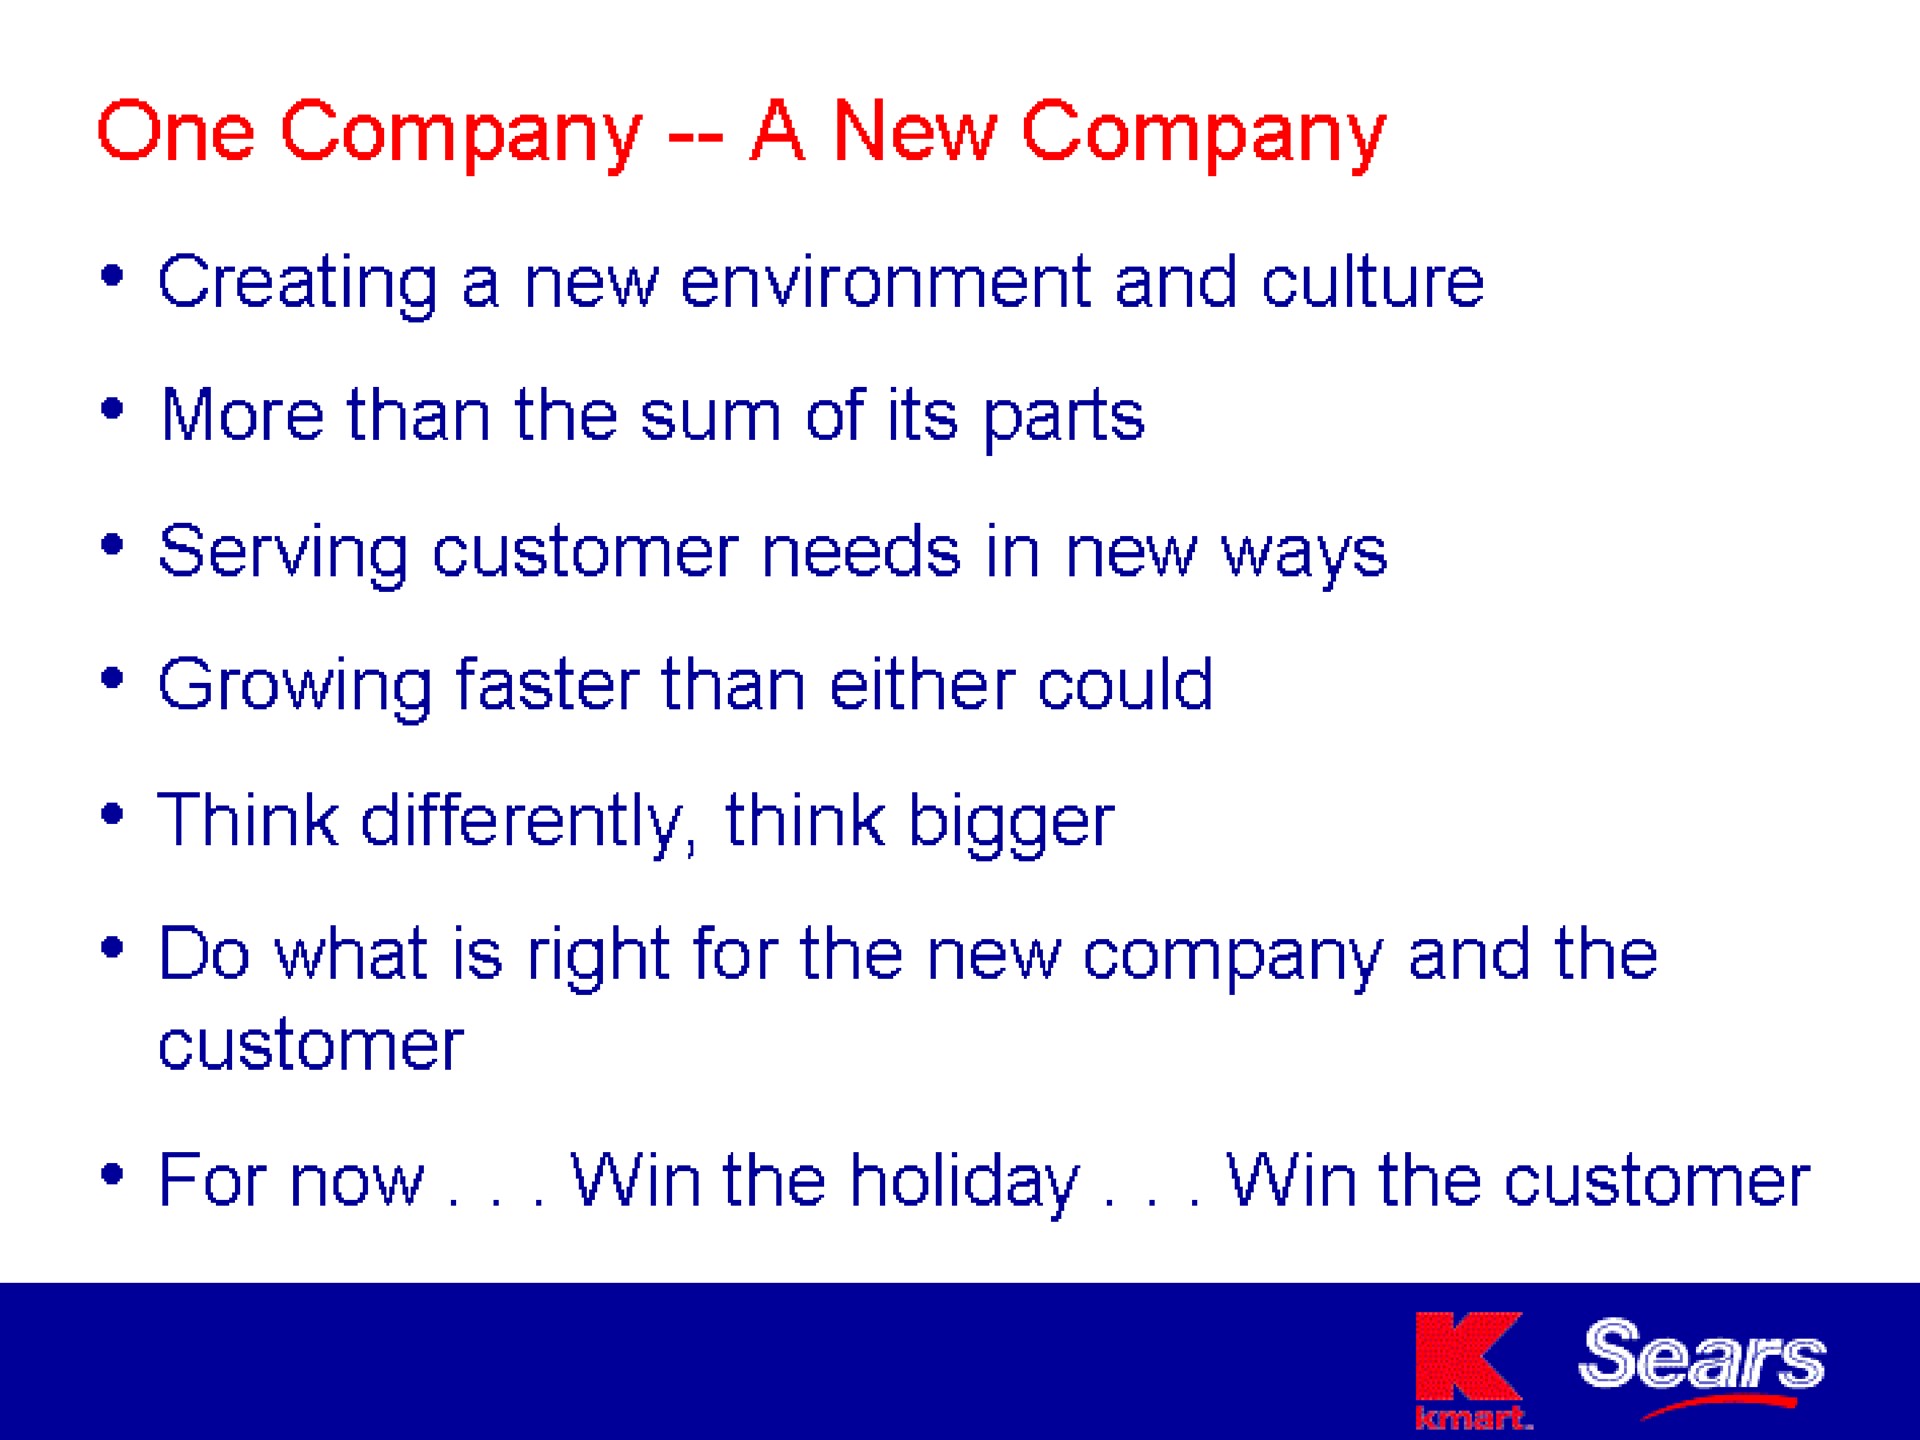 one company a new company creating a new environment and culture more than the sum of its parts serving customer needs in new ways growing faster than either could think differently think bigger do what is right for the new company and the customer holiday the customer | Sears